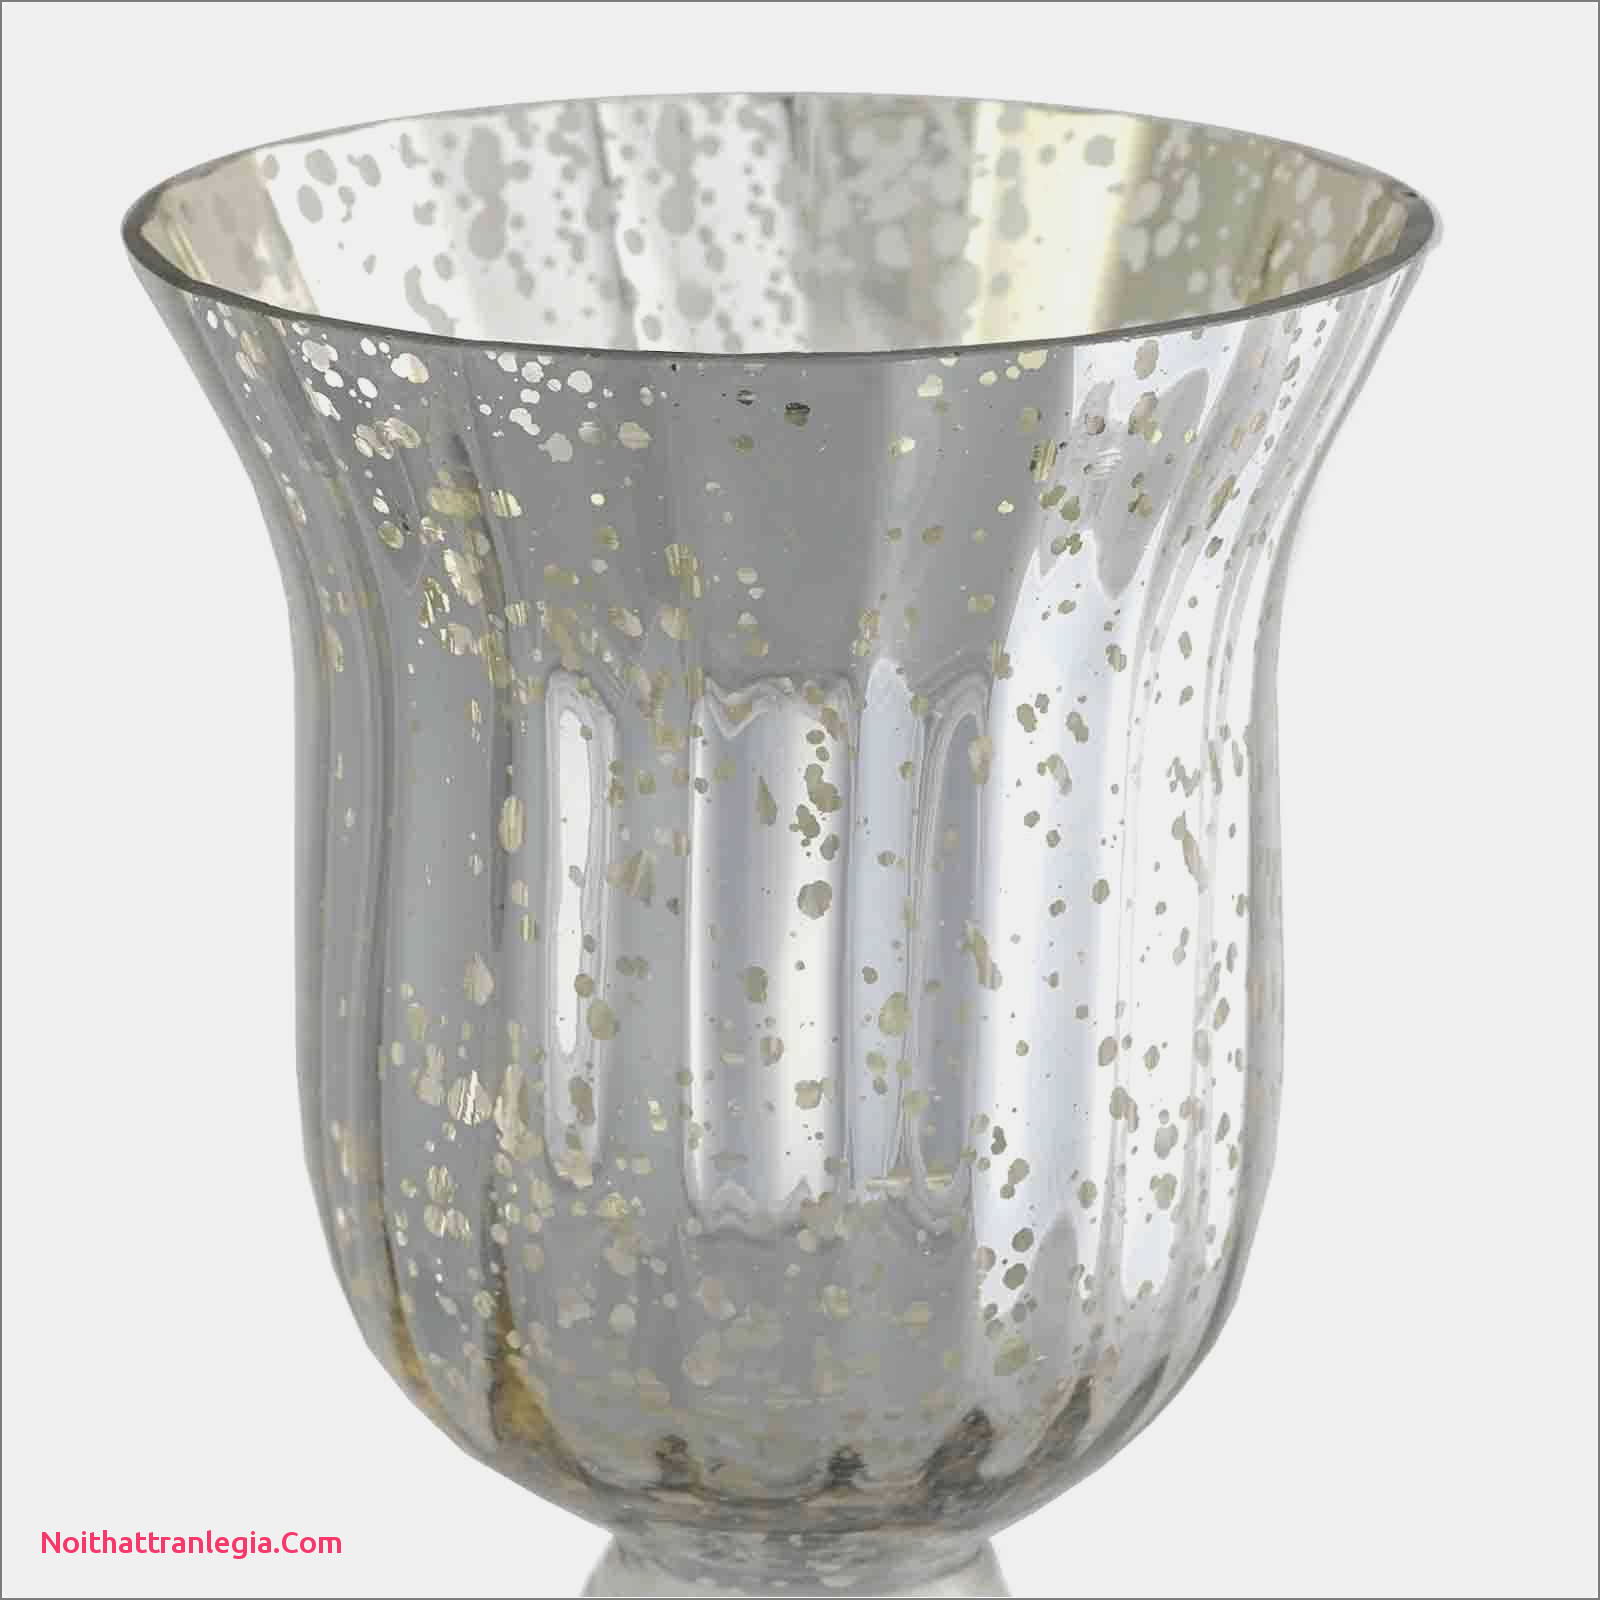 18 Unique Watering Can Vase Metal 2024 free download watering can vase metal of 20 wedding vases noithattranlegia vases design within wedding guest gift ideas inspirational candles for wedding favors superb pe s5h vases candle vase i